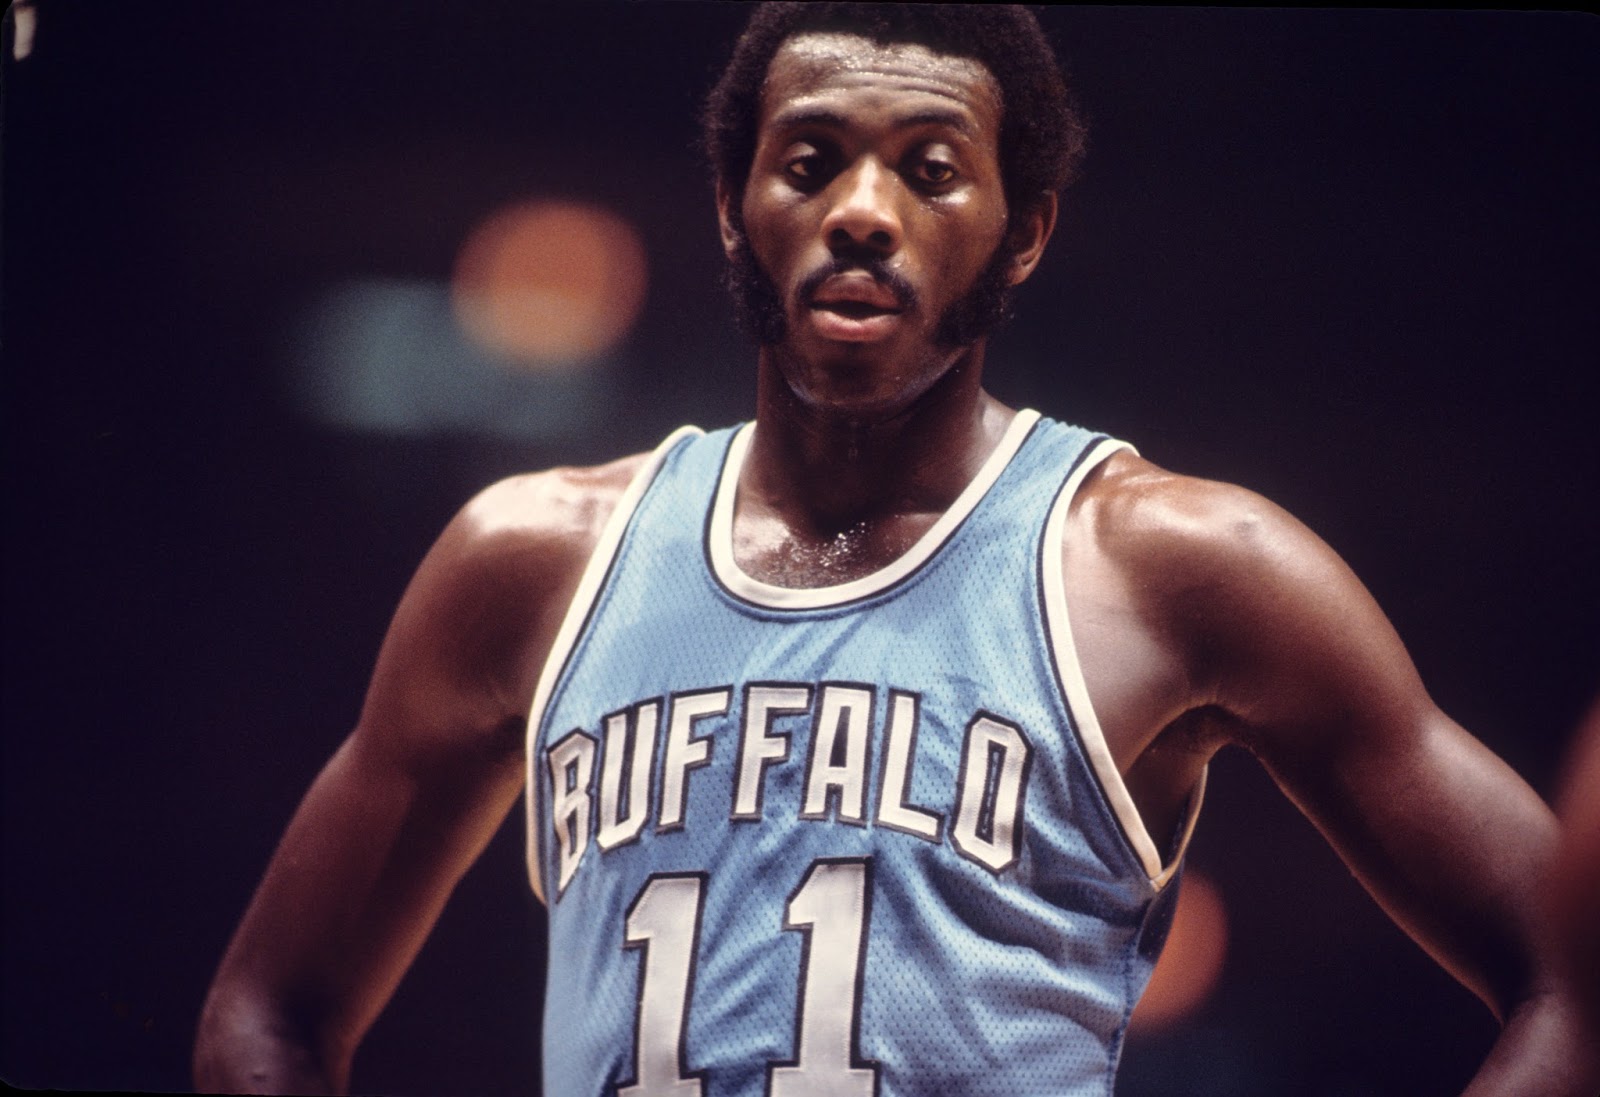 Top Ten NBA Players of the 70s